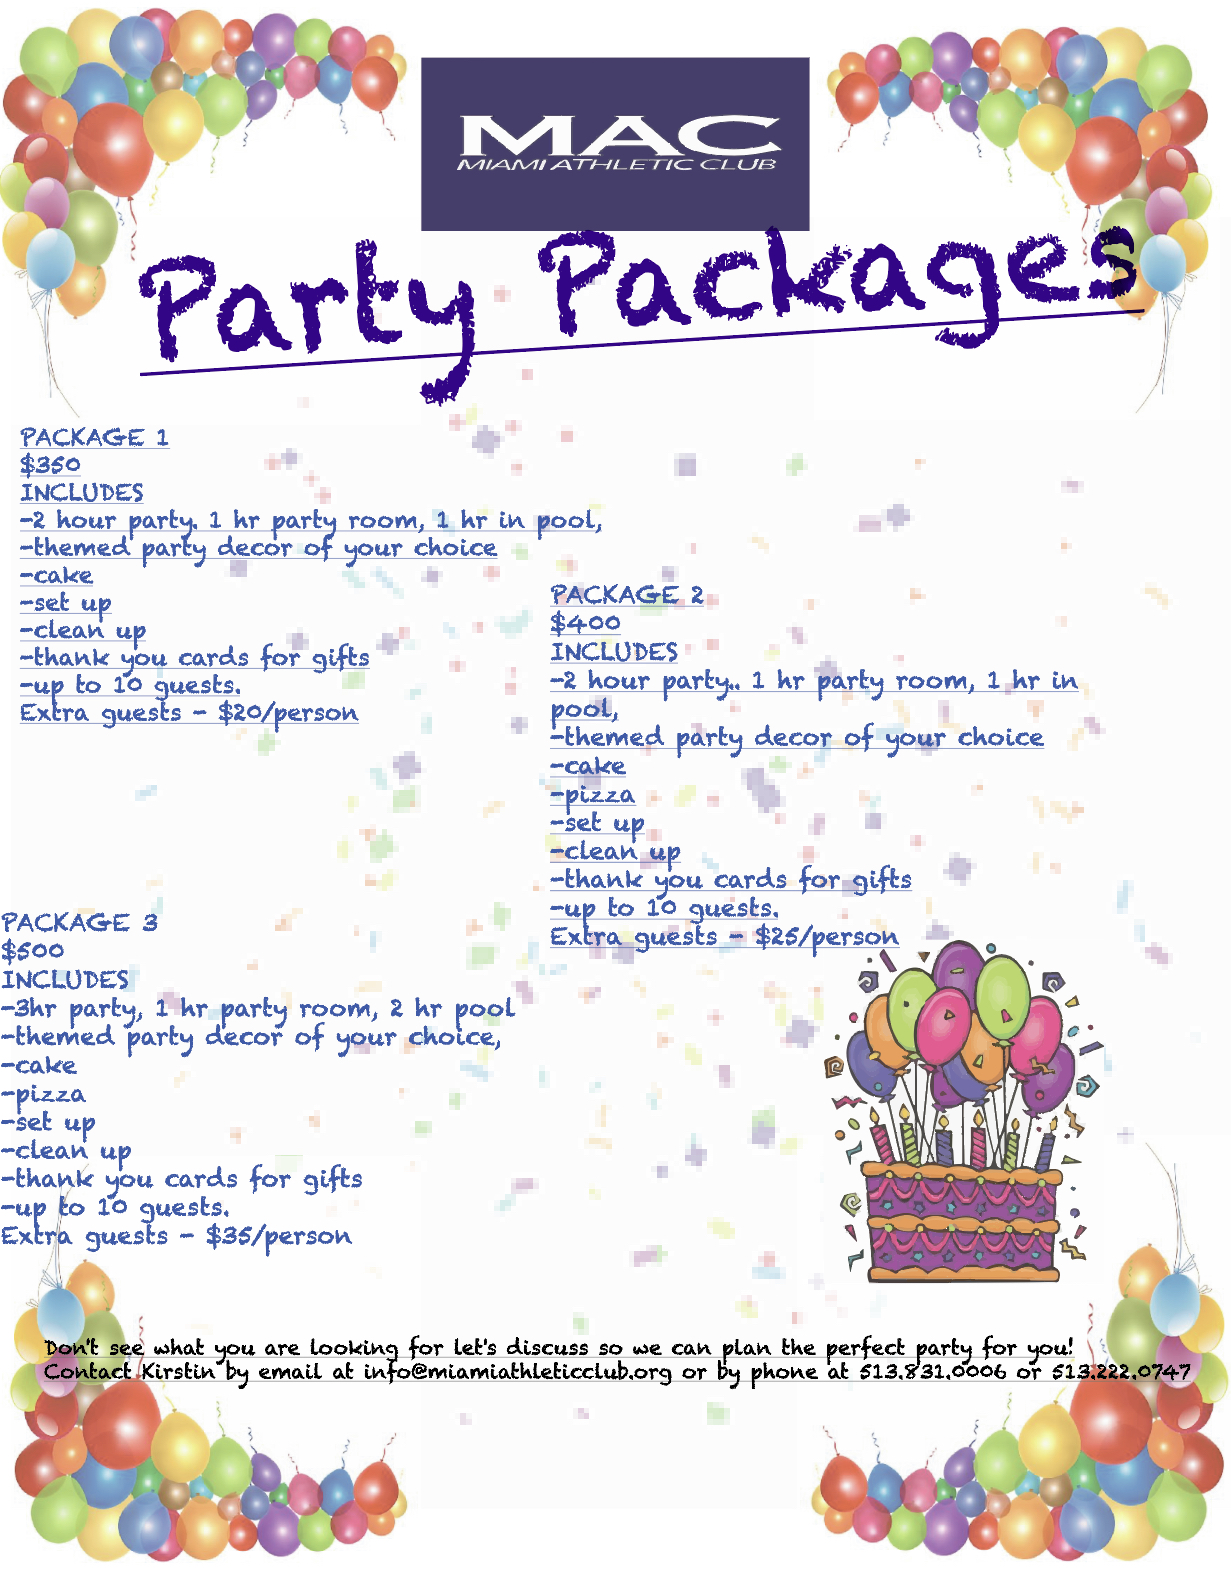 MAC Party Package Pricing